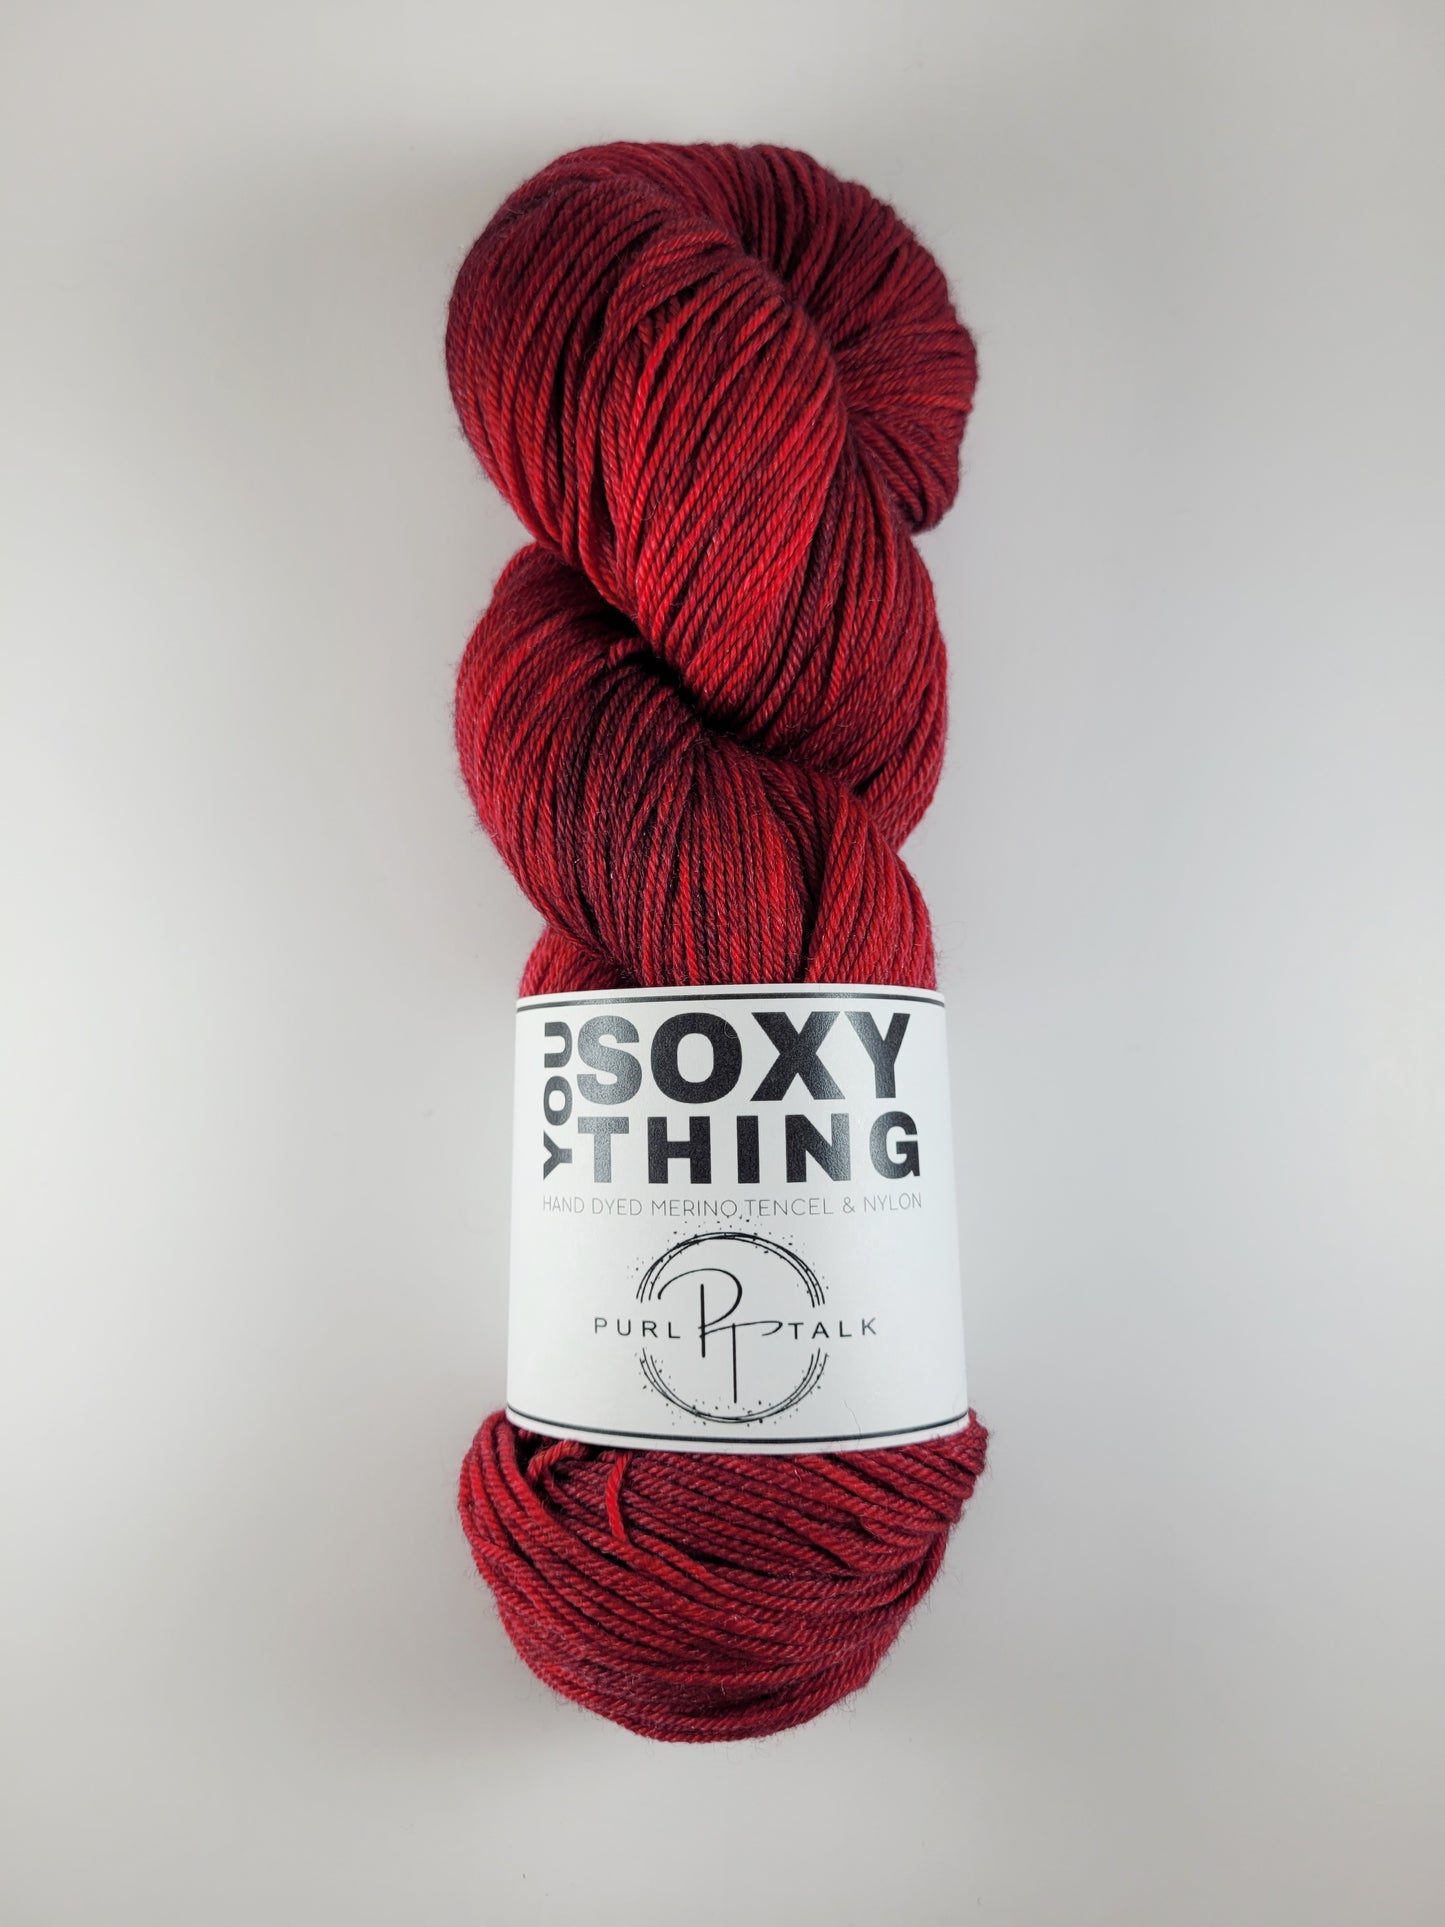 You Soxy Thing, Color:  Crimson